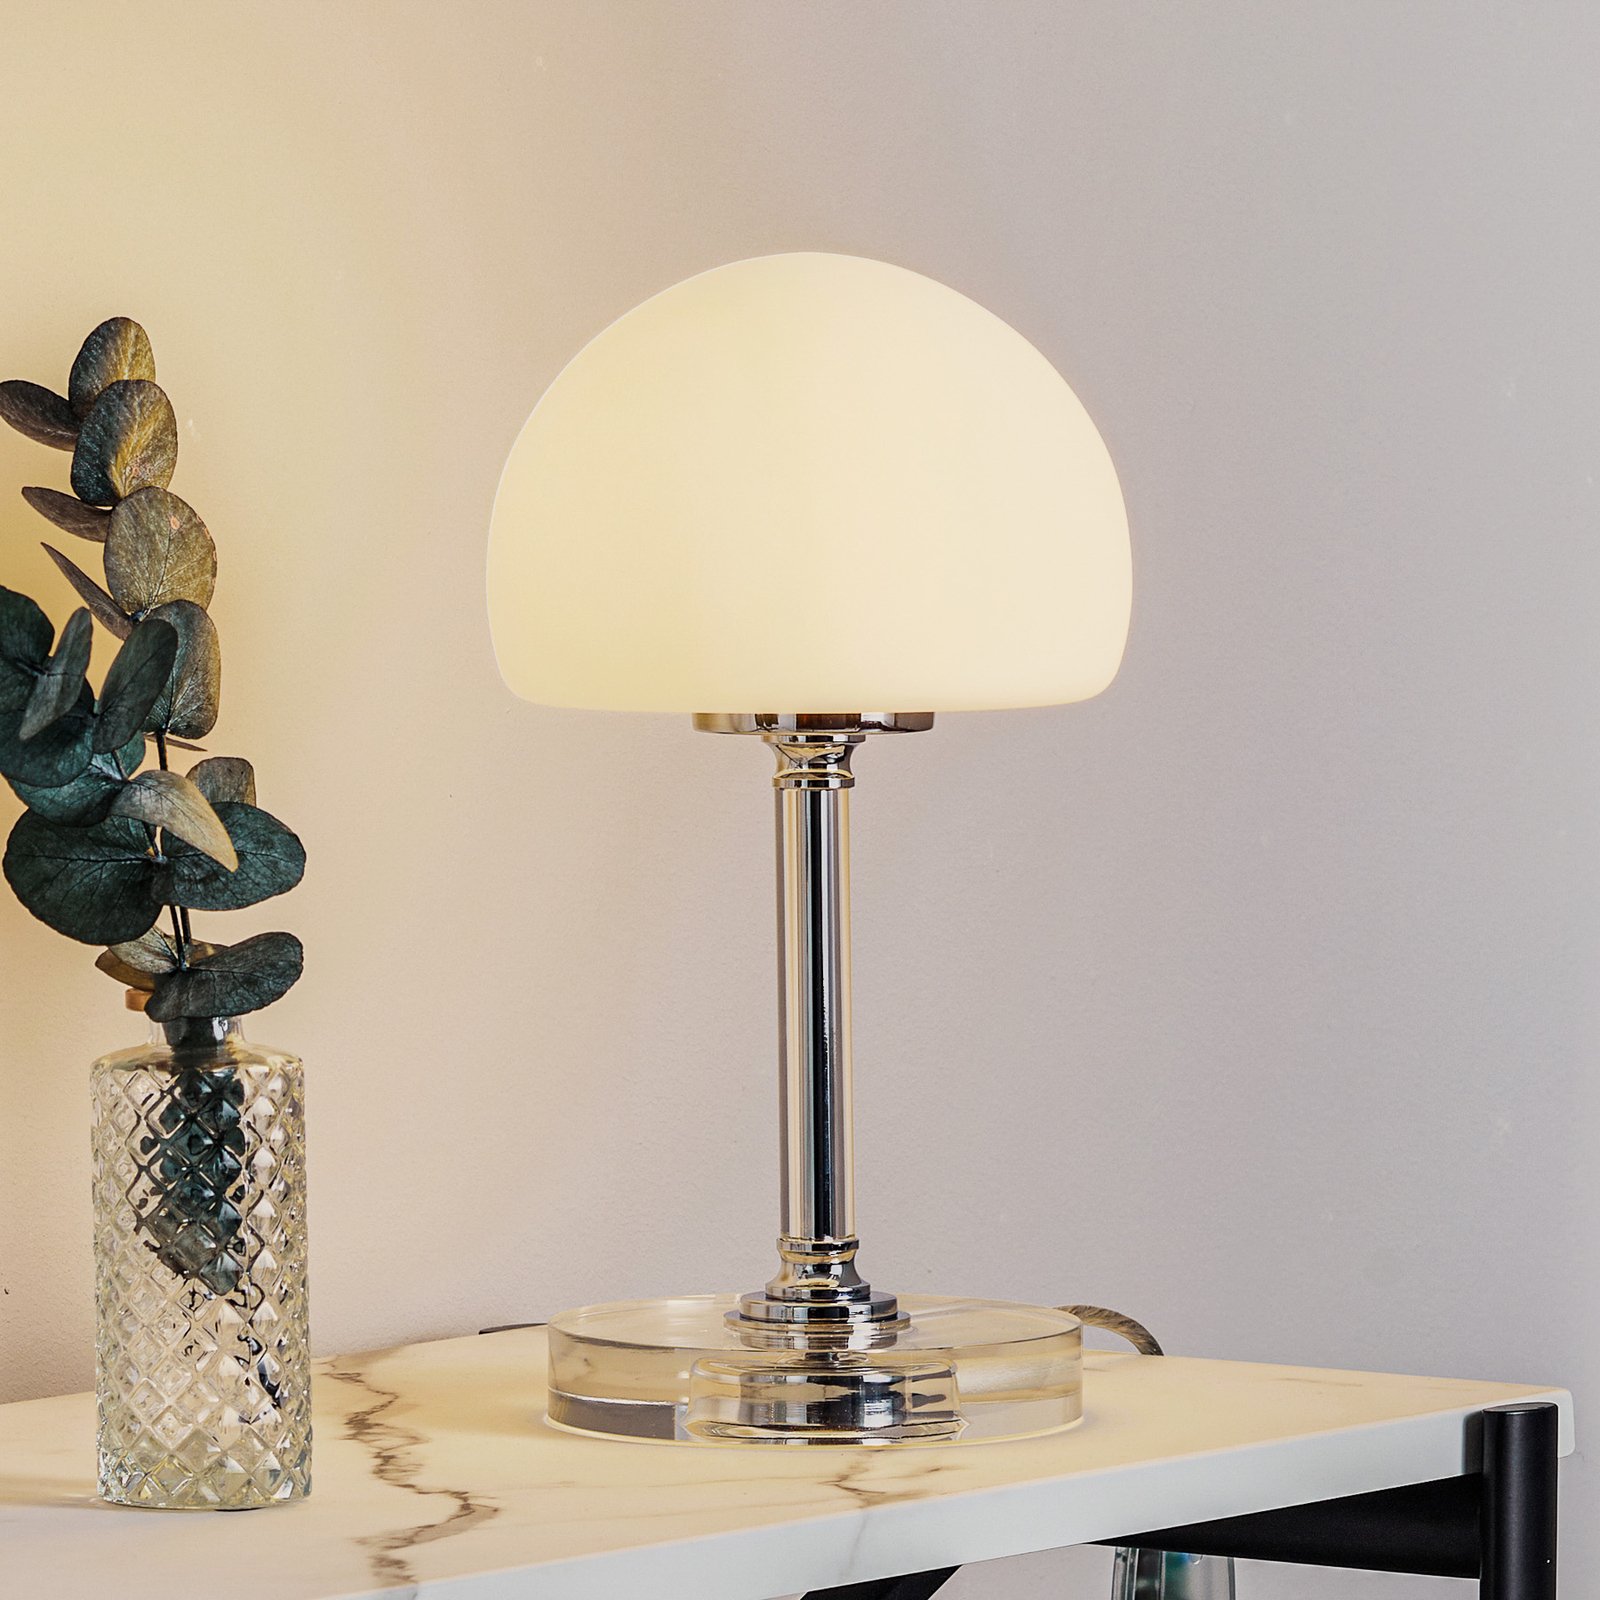 Ancilla - chrome-plated LED table lamp with dimmer